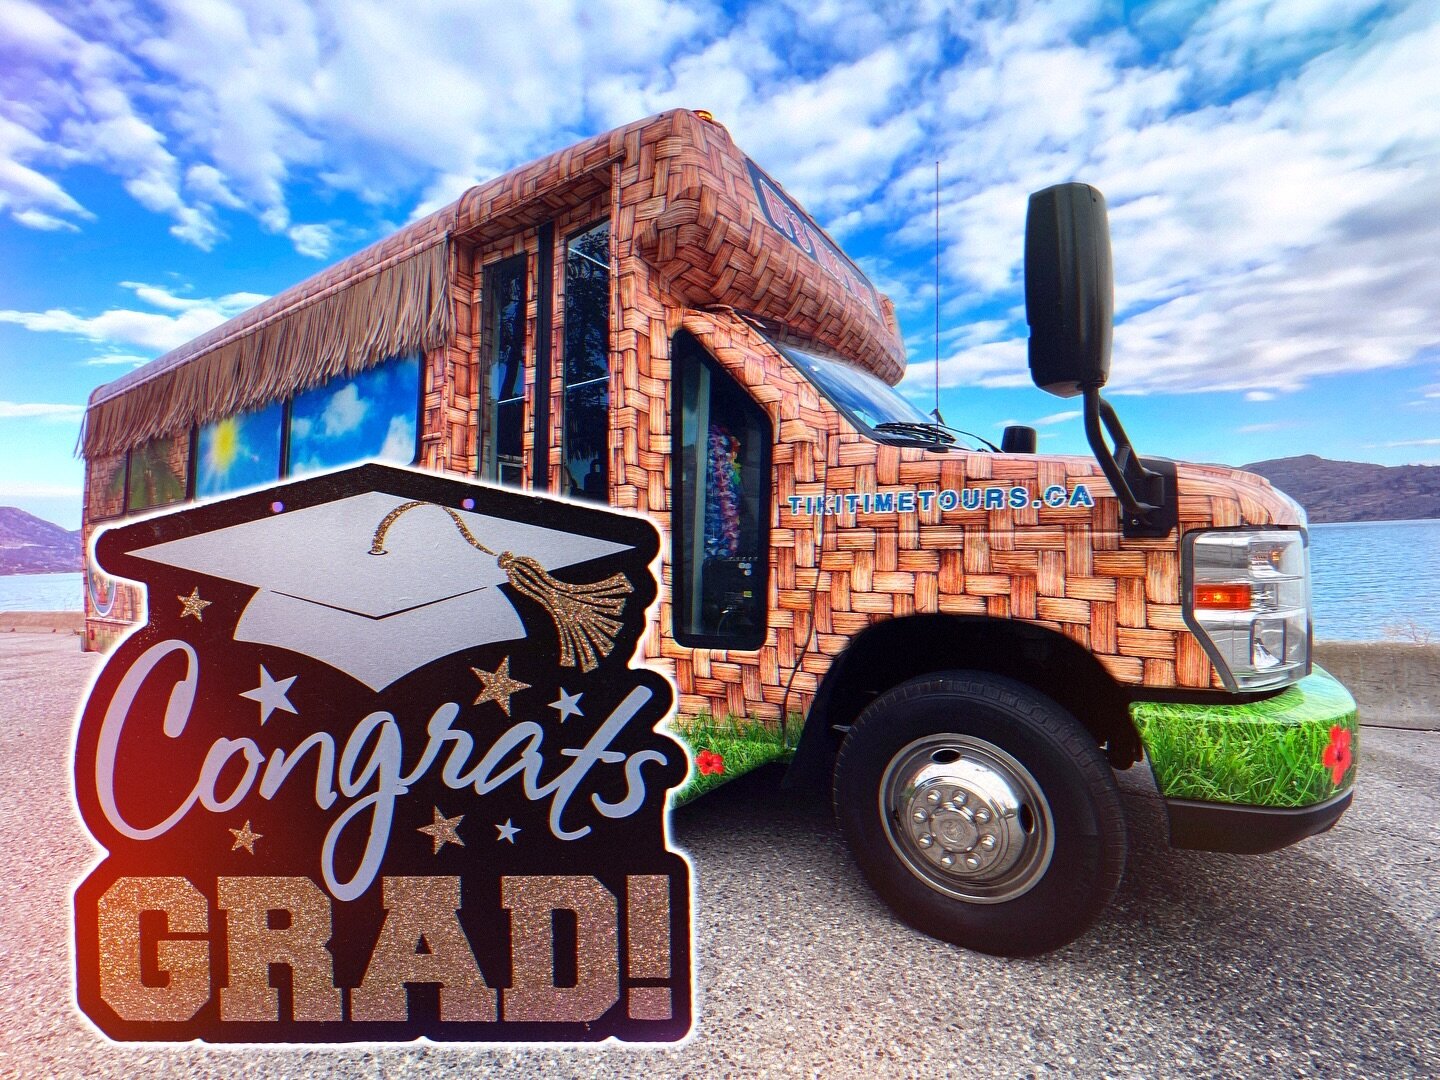 Consider booking one the Tiki Fleet vehicles for grad this Spring. Our Tiki Buses can seat either 16 or 24 passengers, while the Tiki Wagon seats 7. Passengers can enjoy music, lights and onboard karaoke with all of their friends and family between g